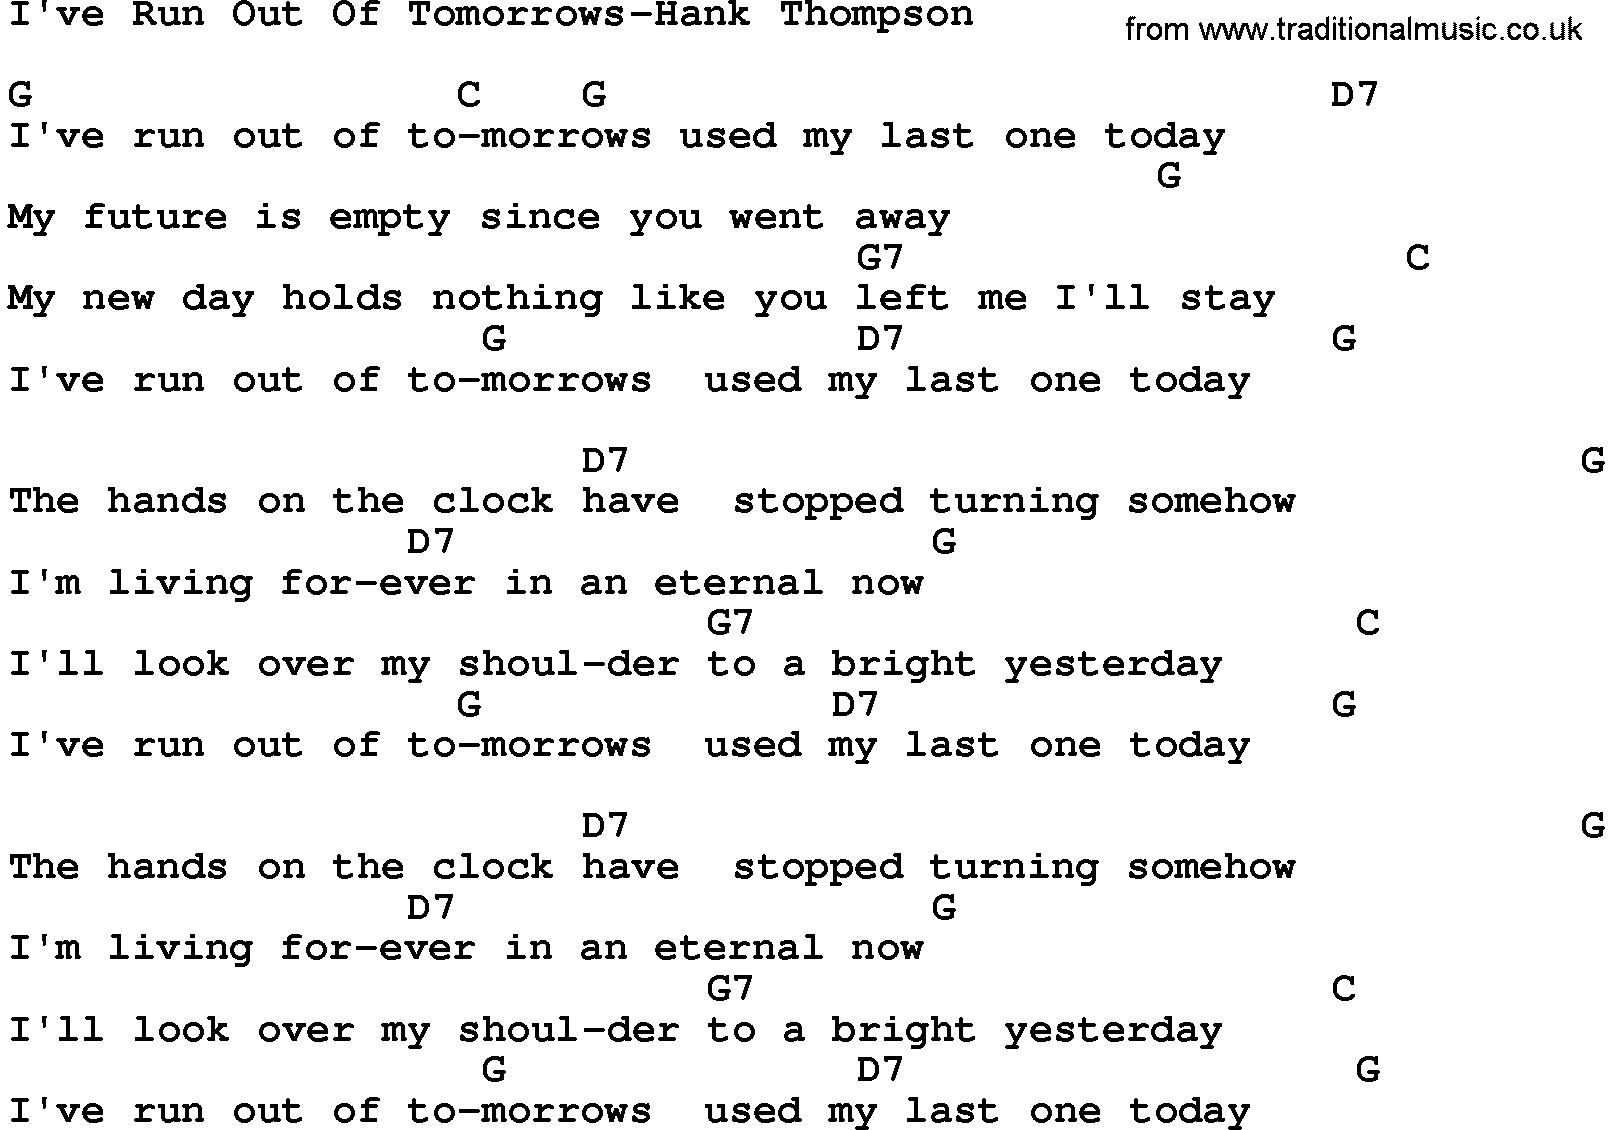 Country music song: I've Run Out Of Tomorrows-Hank Thompson lyrics and chords